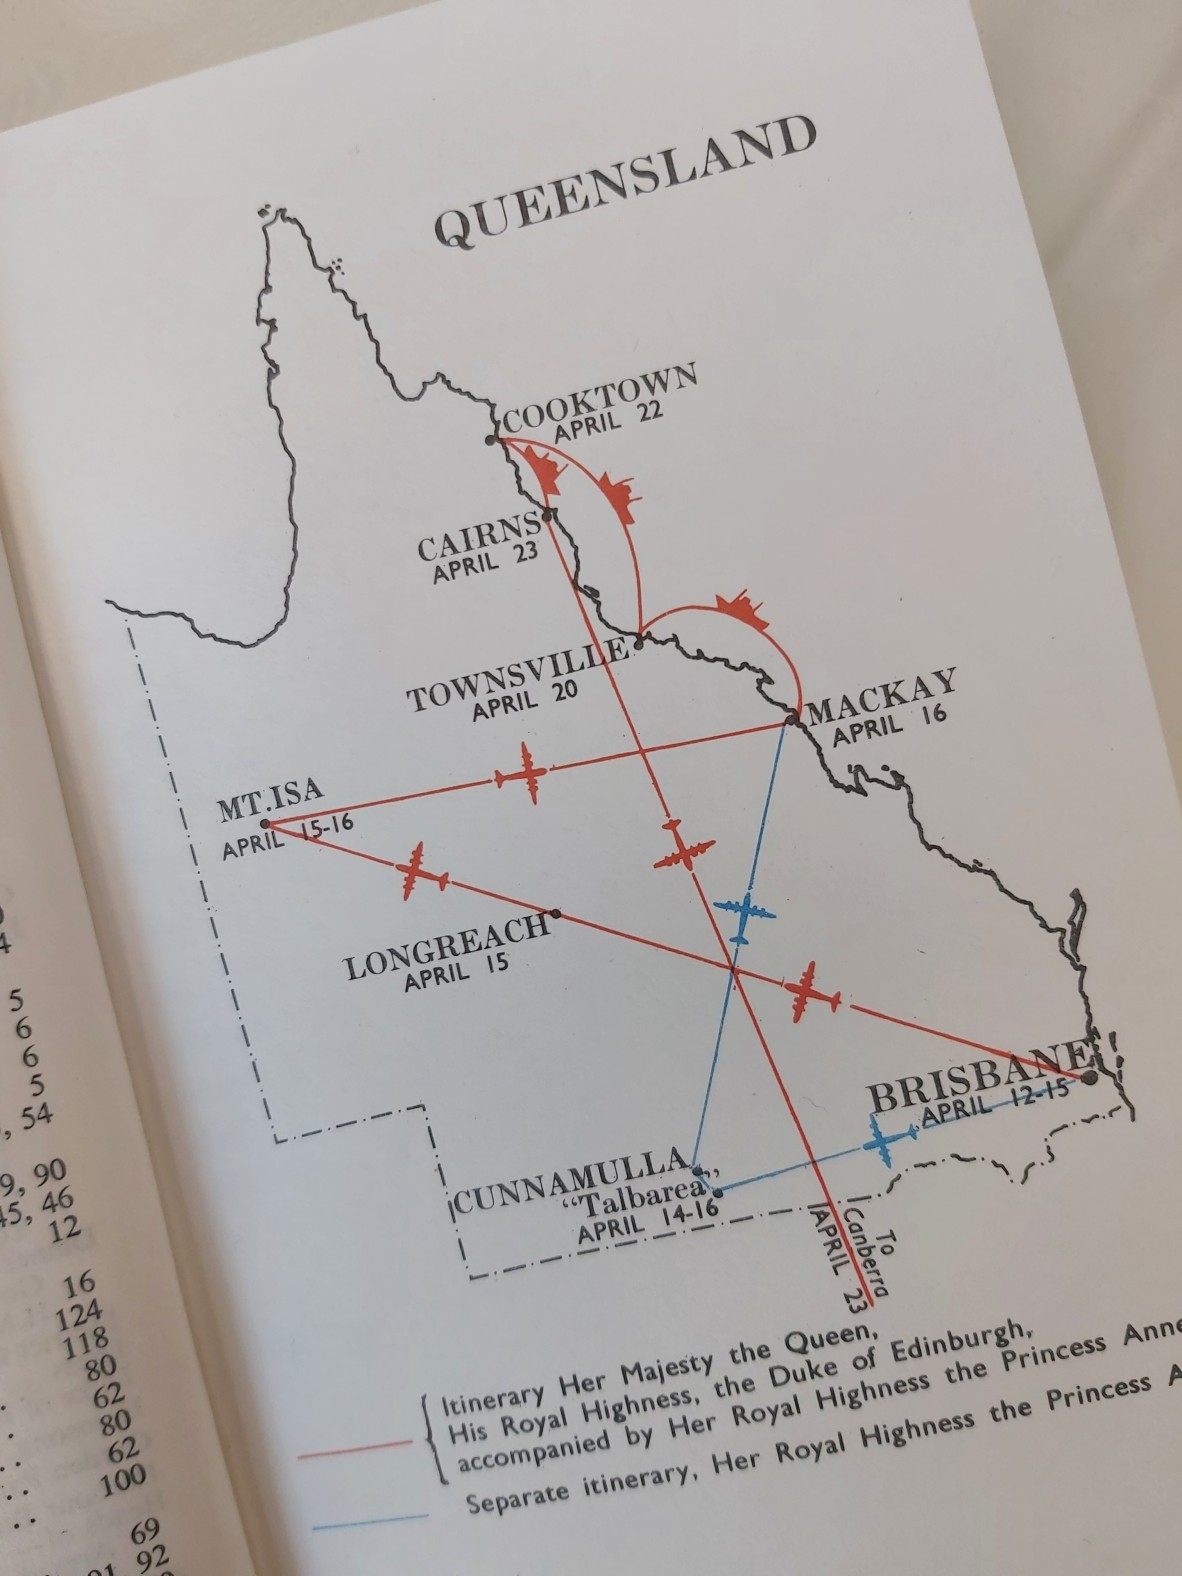 Map of Queensland showing flight paths and destinations across Queensland of the 1970 royal visit including Princess Anne’s detour to Cunnamulla. 